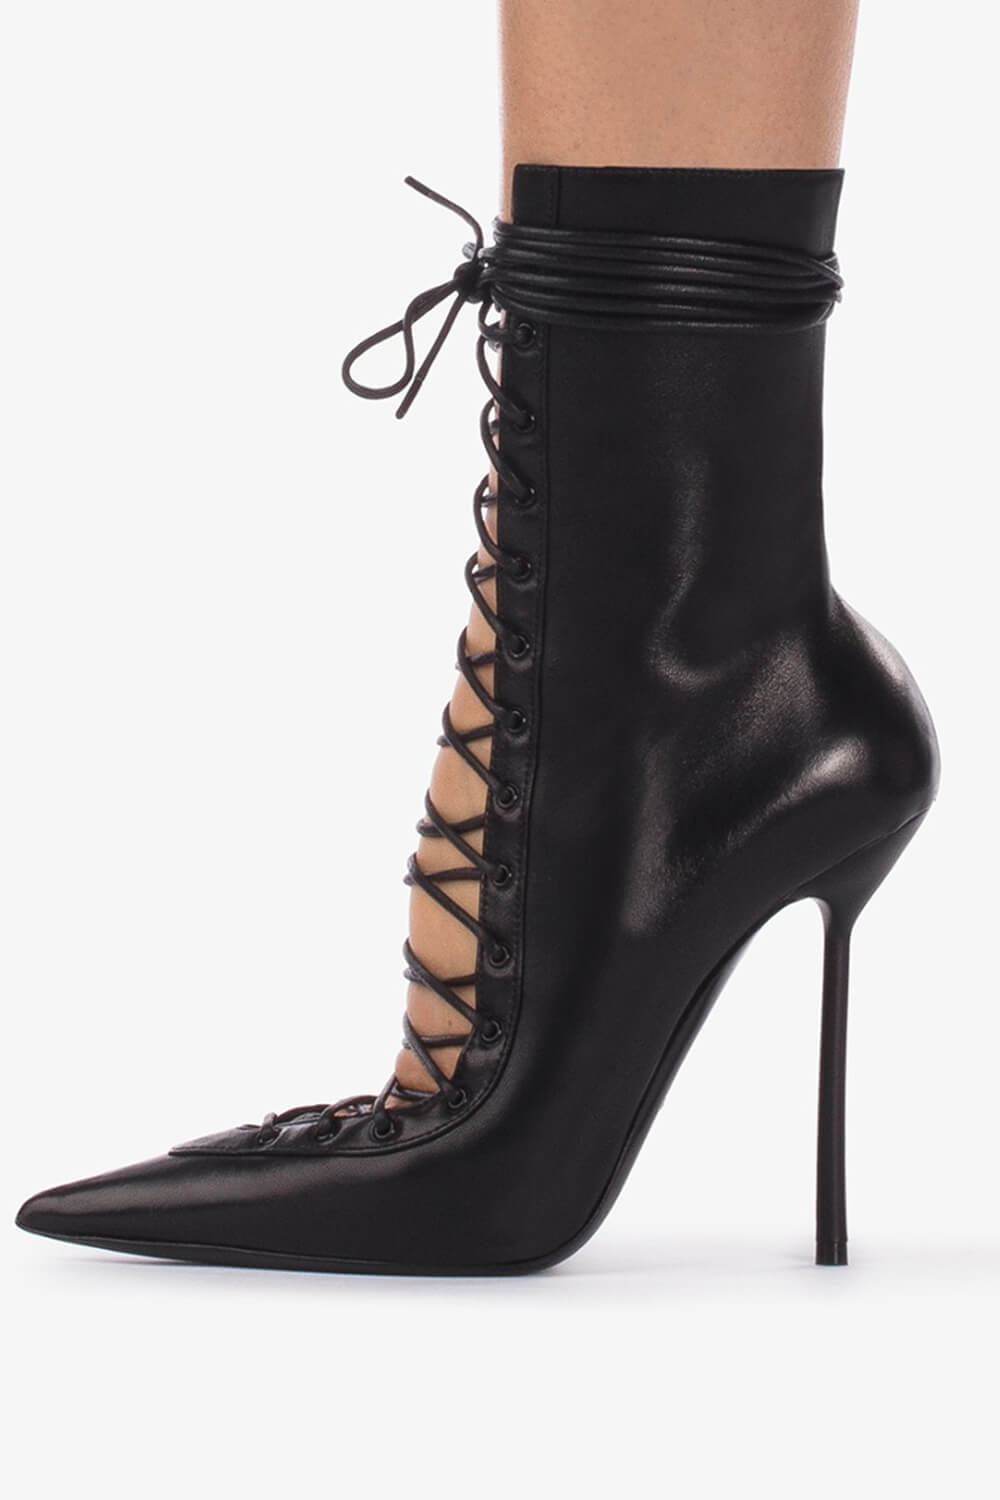 Laced-Up Tapered Pointed Toe Ankle High Stiletto Boots - Black